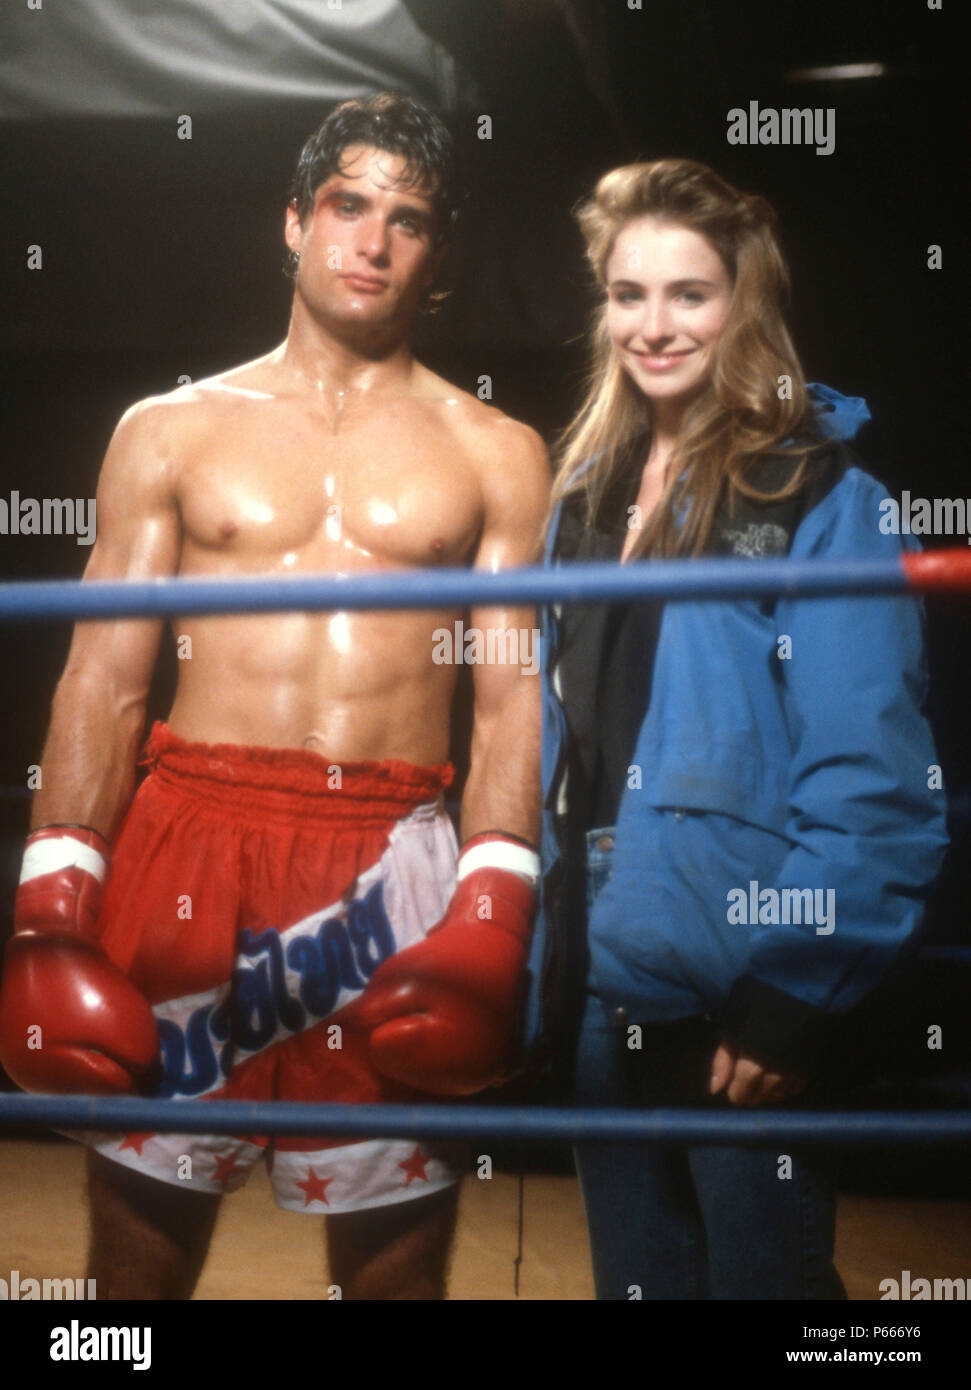 LOS ANGELES, CA - DECEMBER 7: (EXCLUSIVE) Actor John Haymes Newton, aka John Newton (L) and girlfriend on set of 'Desert Kickboxer' on December 7, 1991 in Los Angeles, California. Photo by Barry King/Alamy Stock Photo Stock Photo